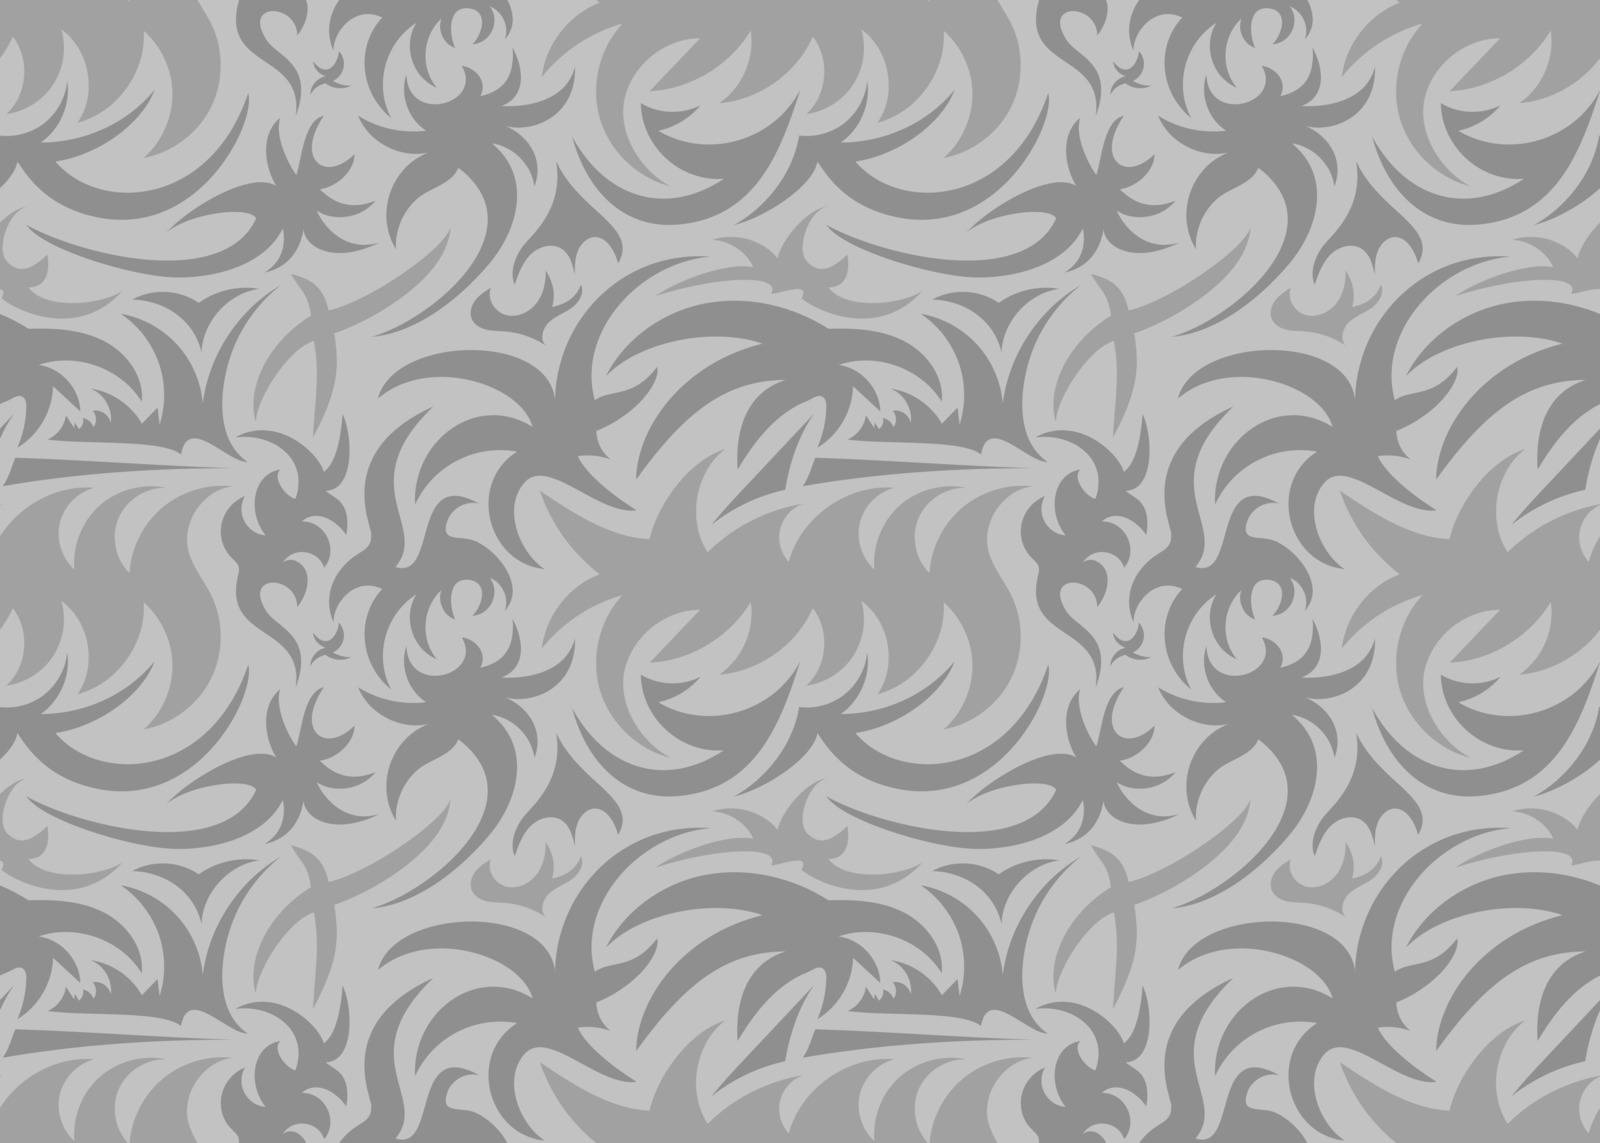 Abstract seamless organic pattern. vector illustration by starush